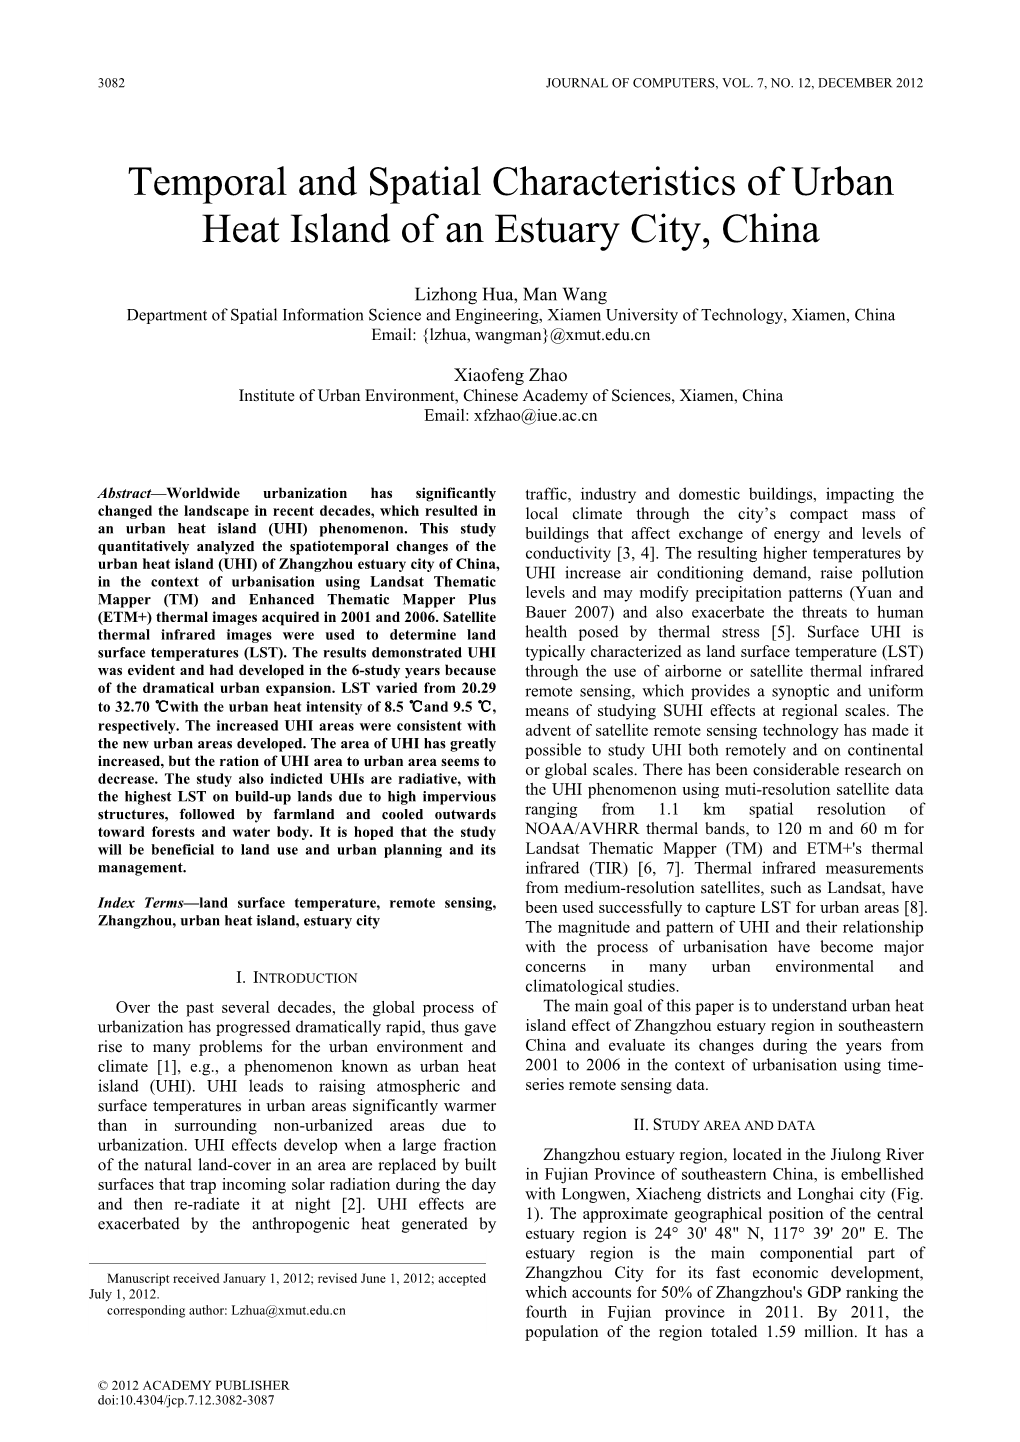 Temporal and Spatial Characteristics of Urban Heat Island of an Estuary City, China